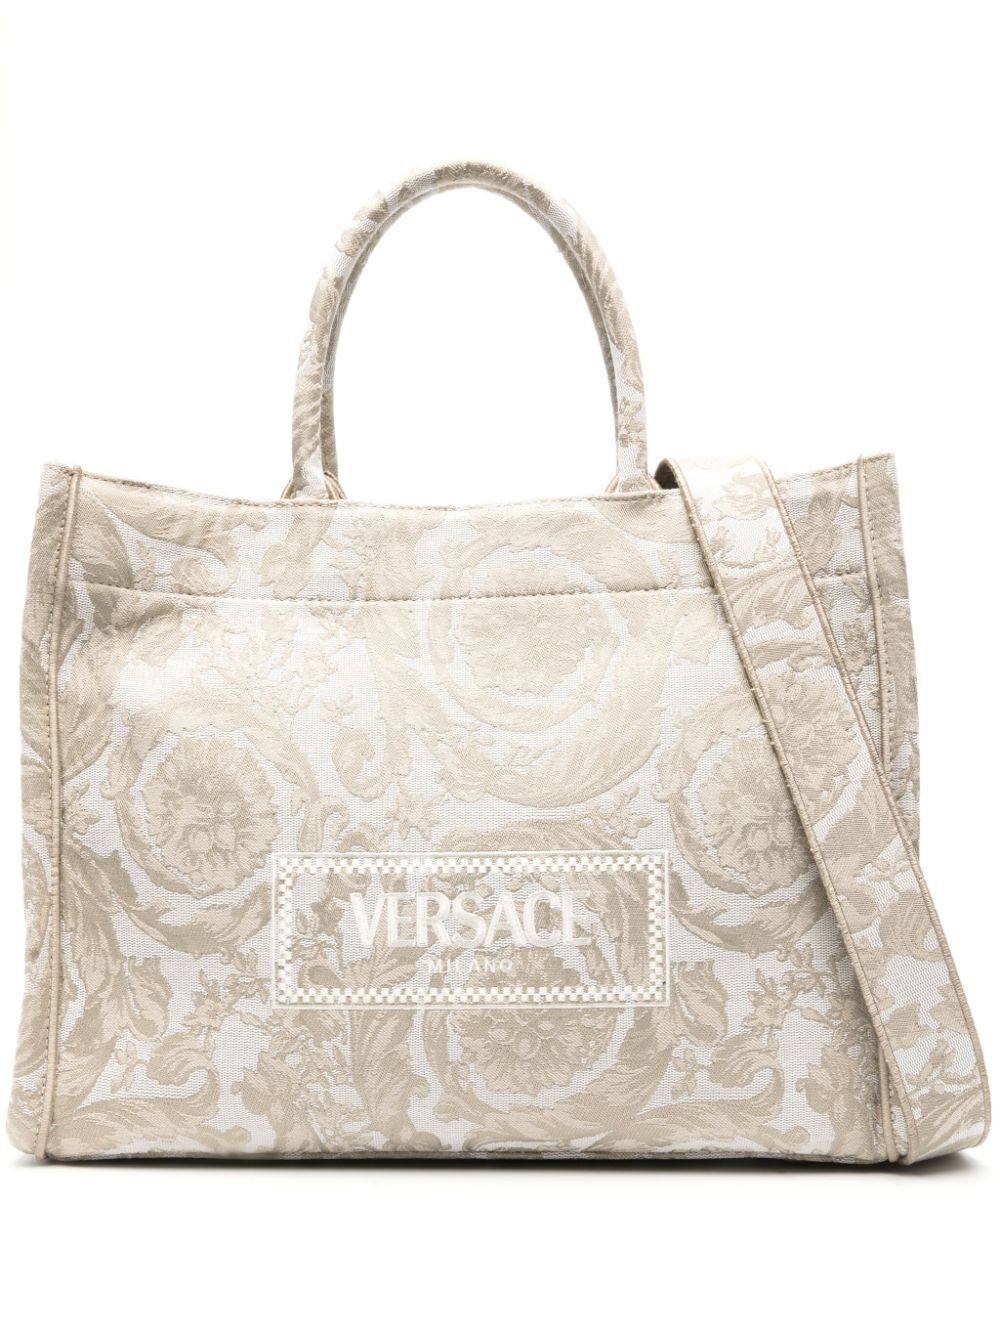 VERSACE LARGE TOTE EMBROIDERY JACQUARD,1011562.1A09741